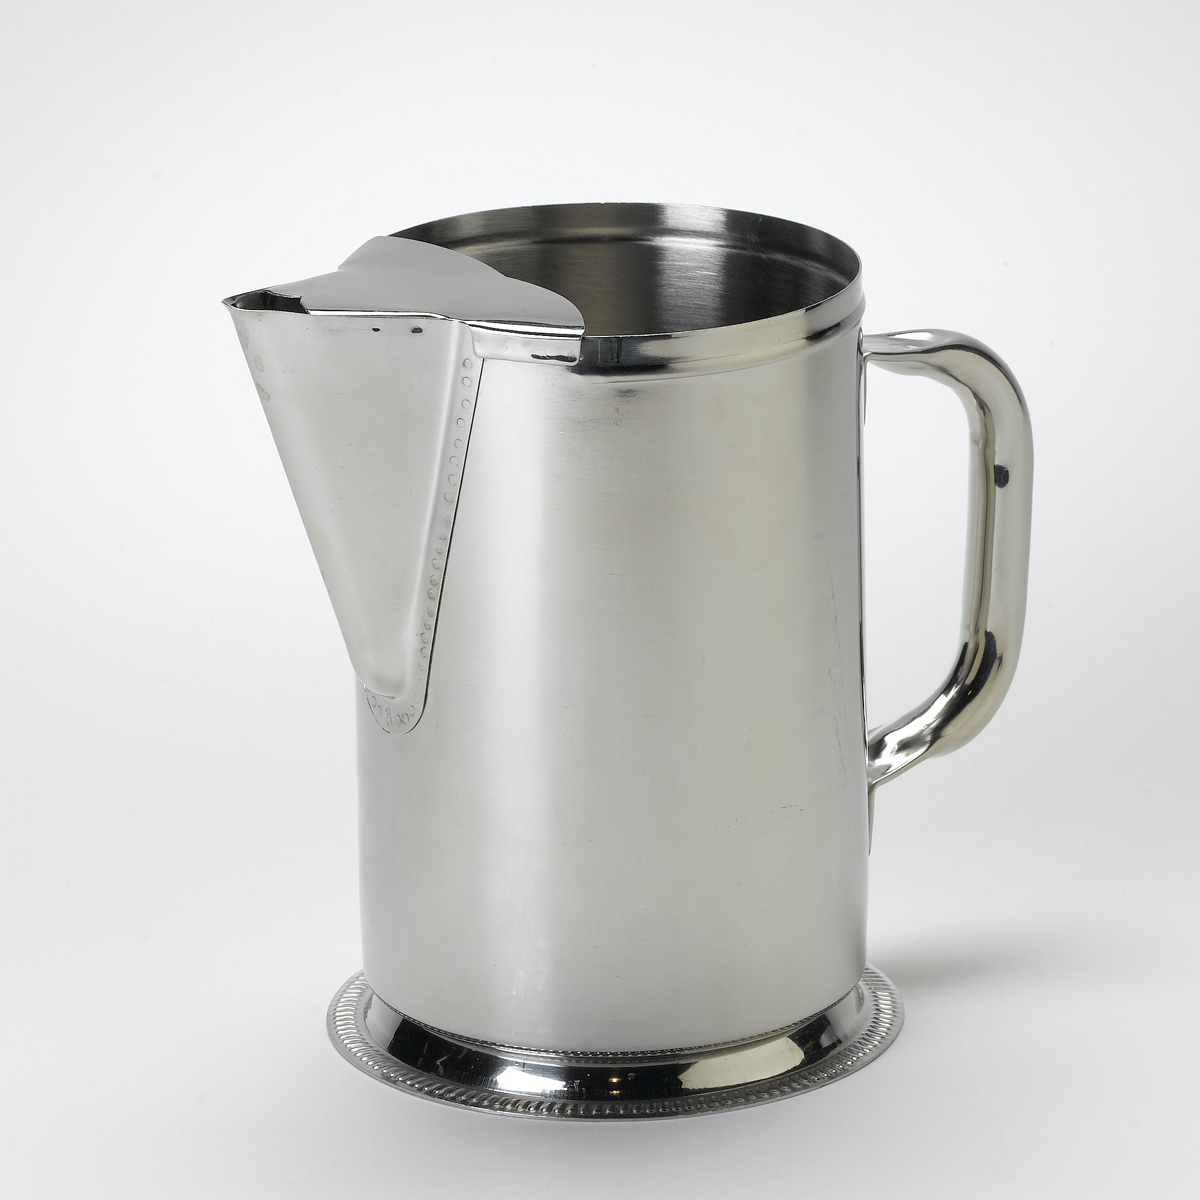 stainless steel water pitcher